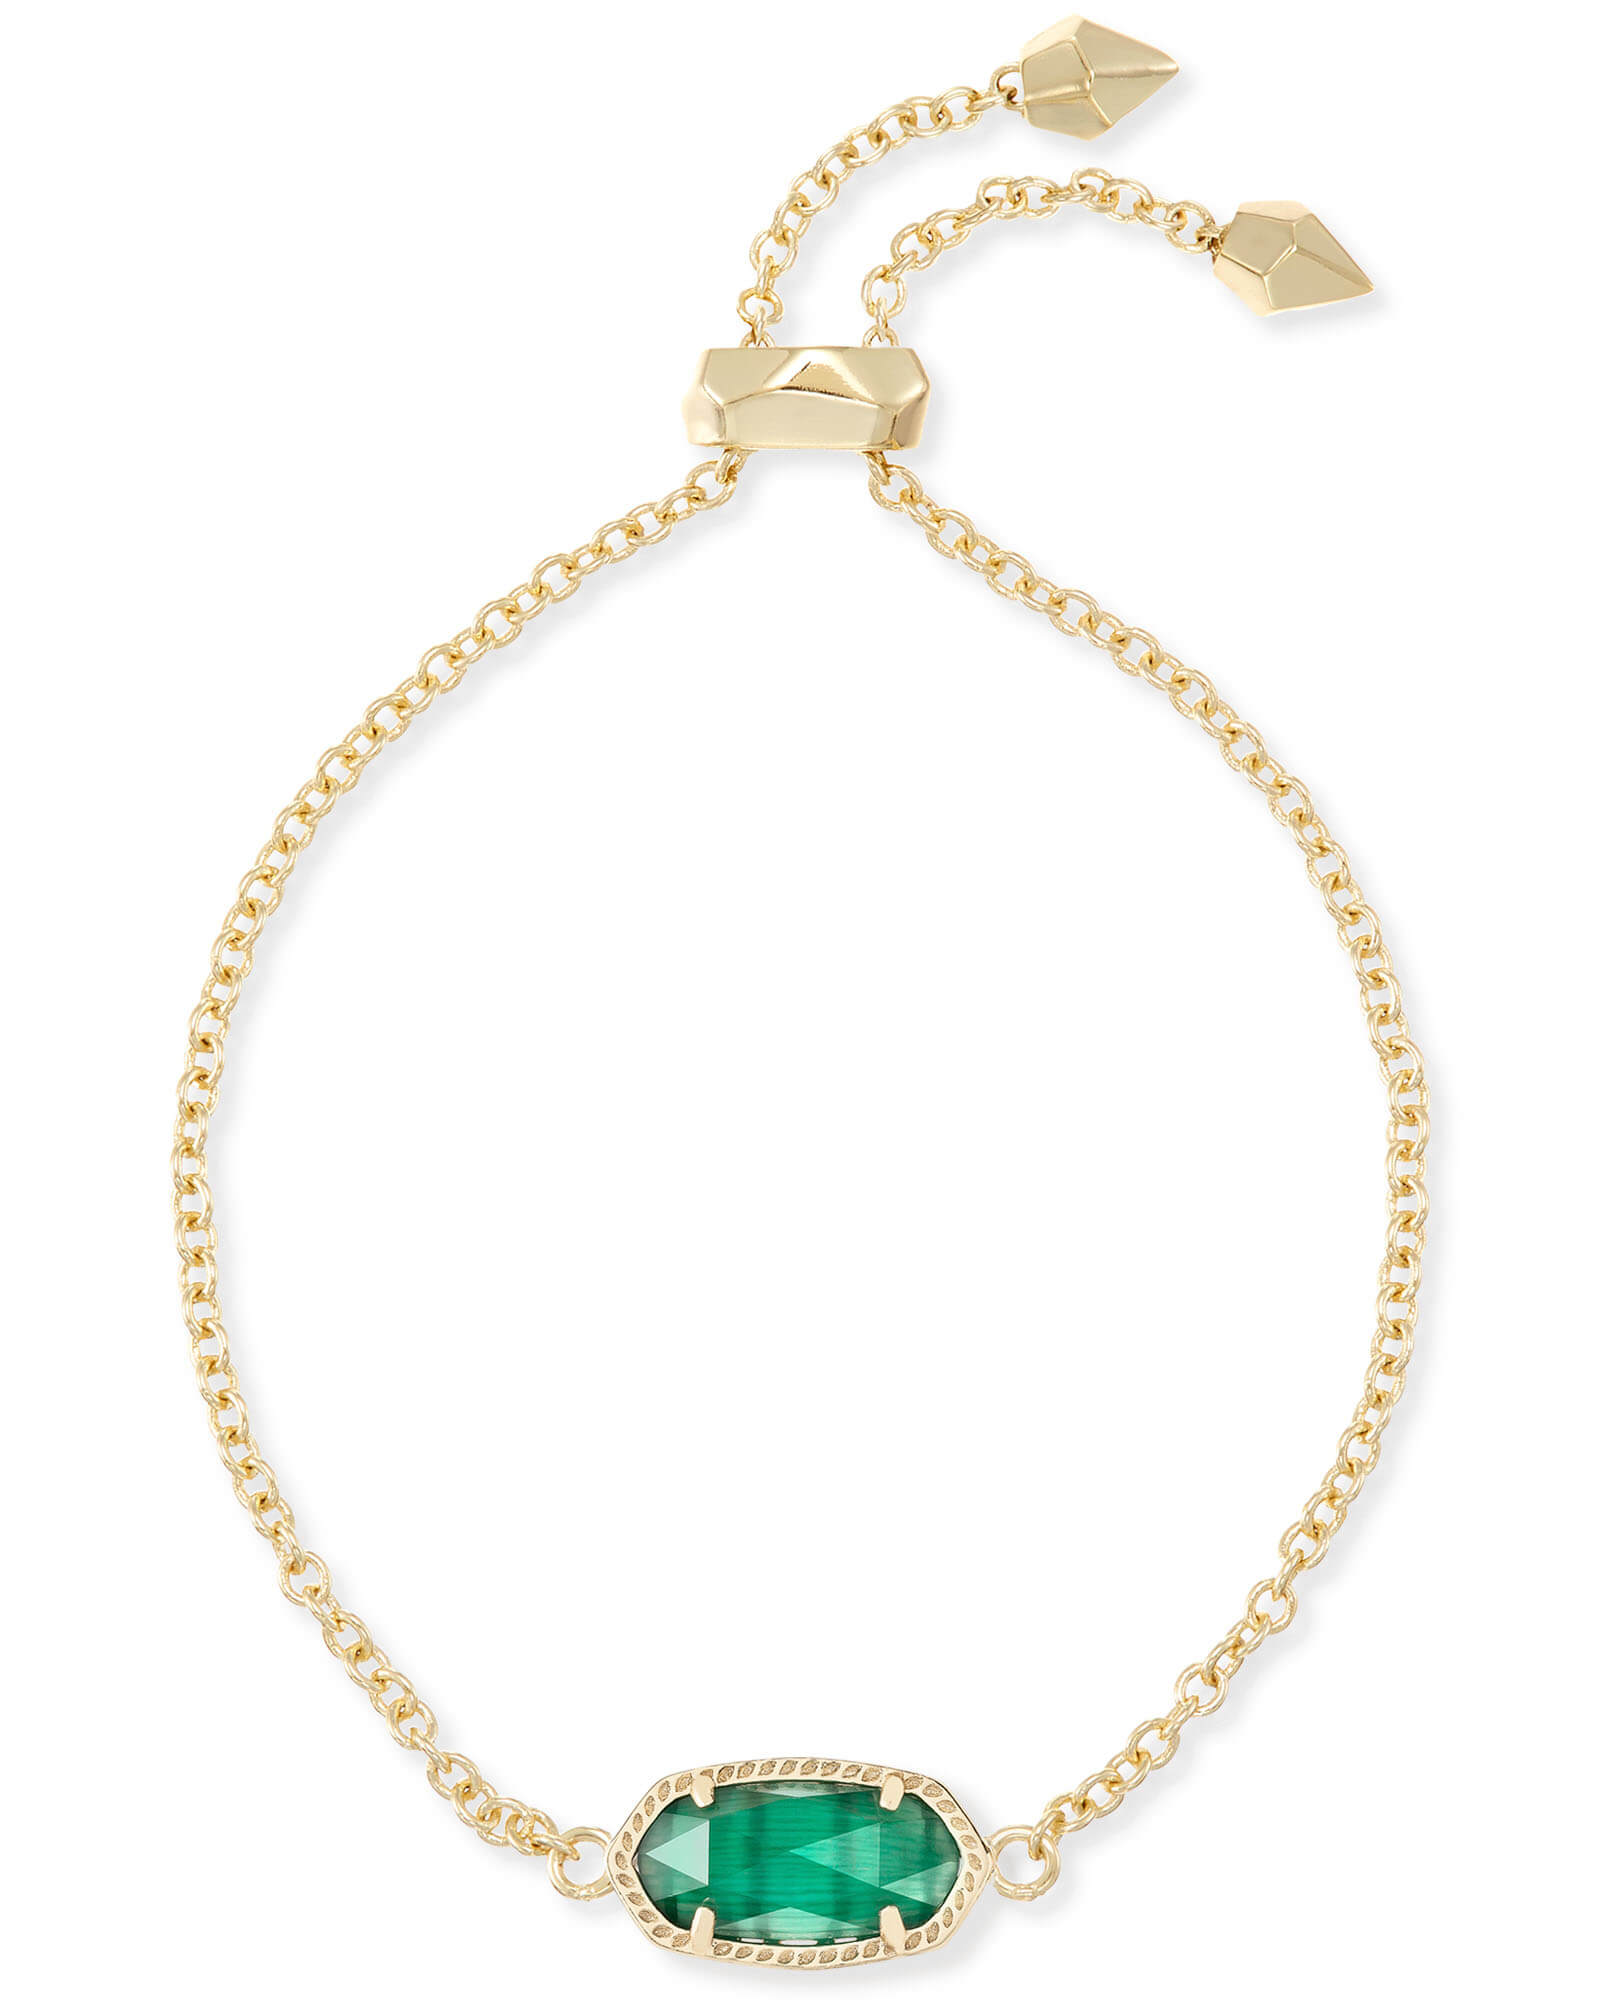 May birthstone Emerald bead bar crystal bracelet in 14k gold fill 6 chain with 2 adjustable extender 